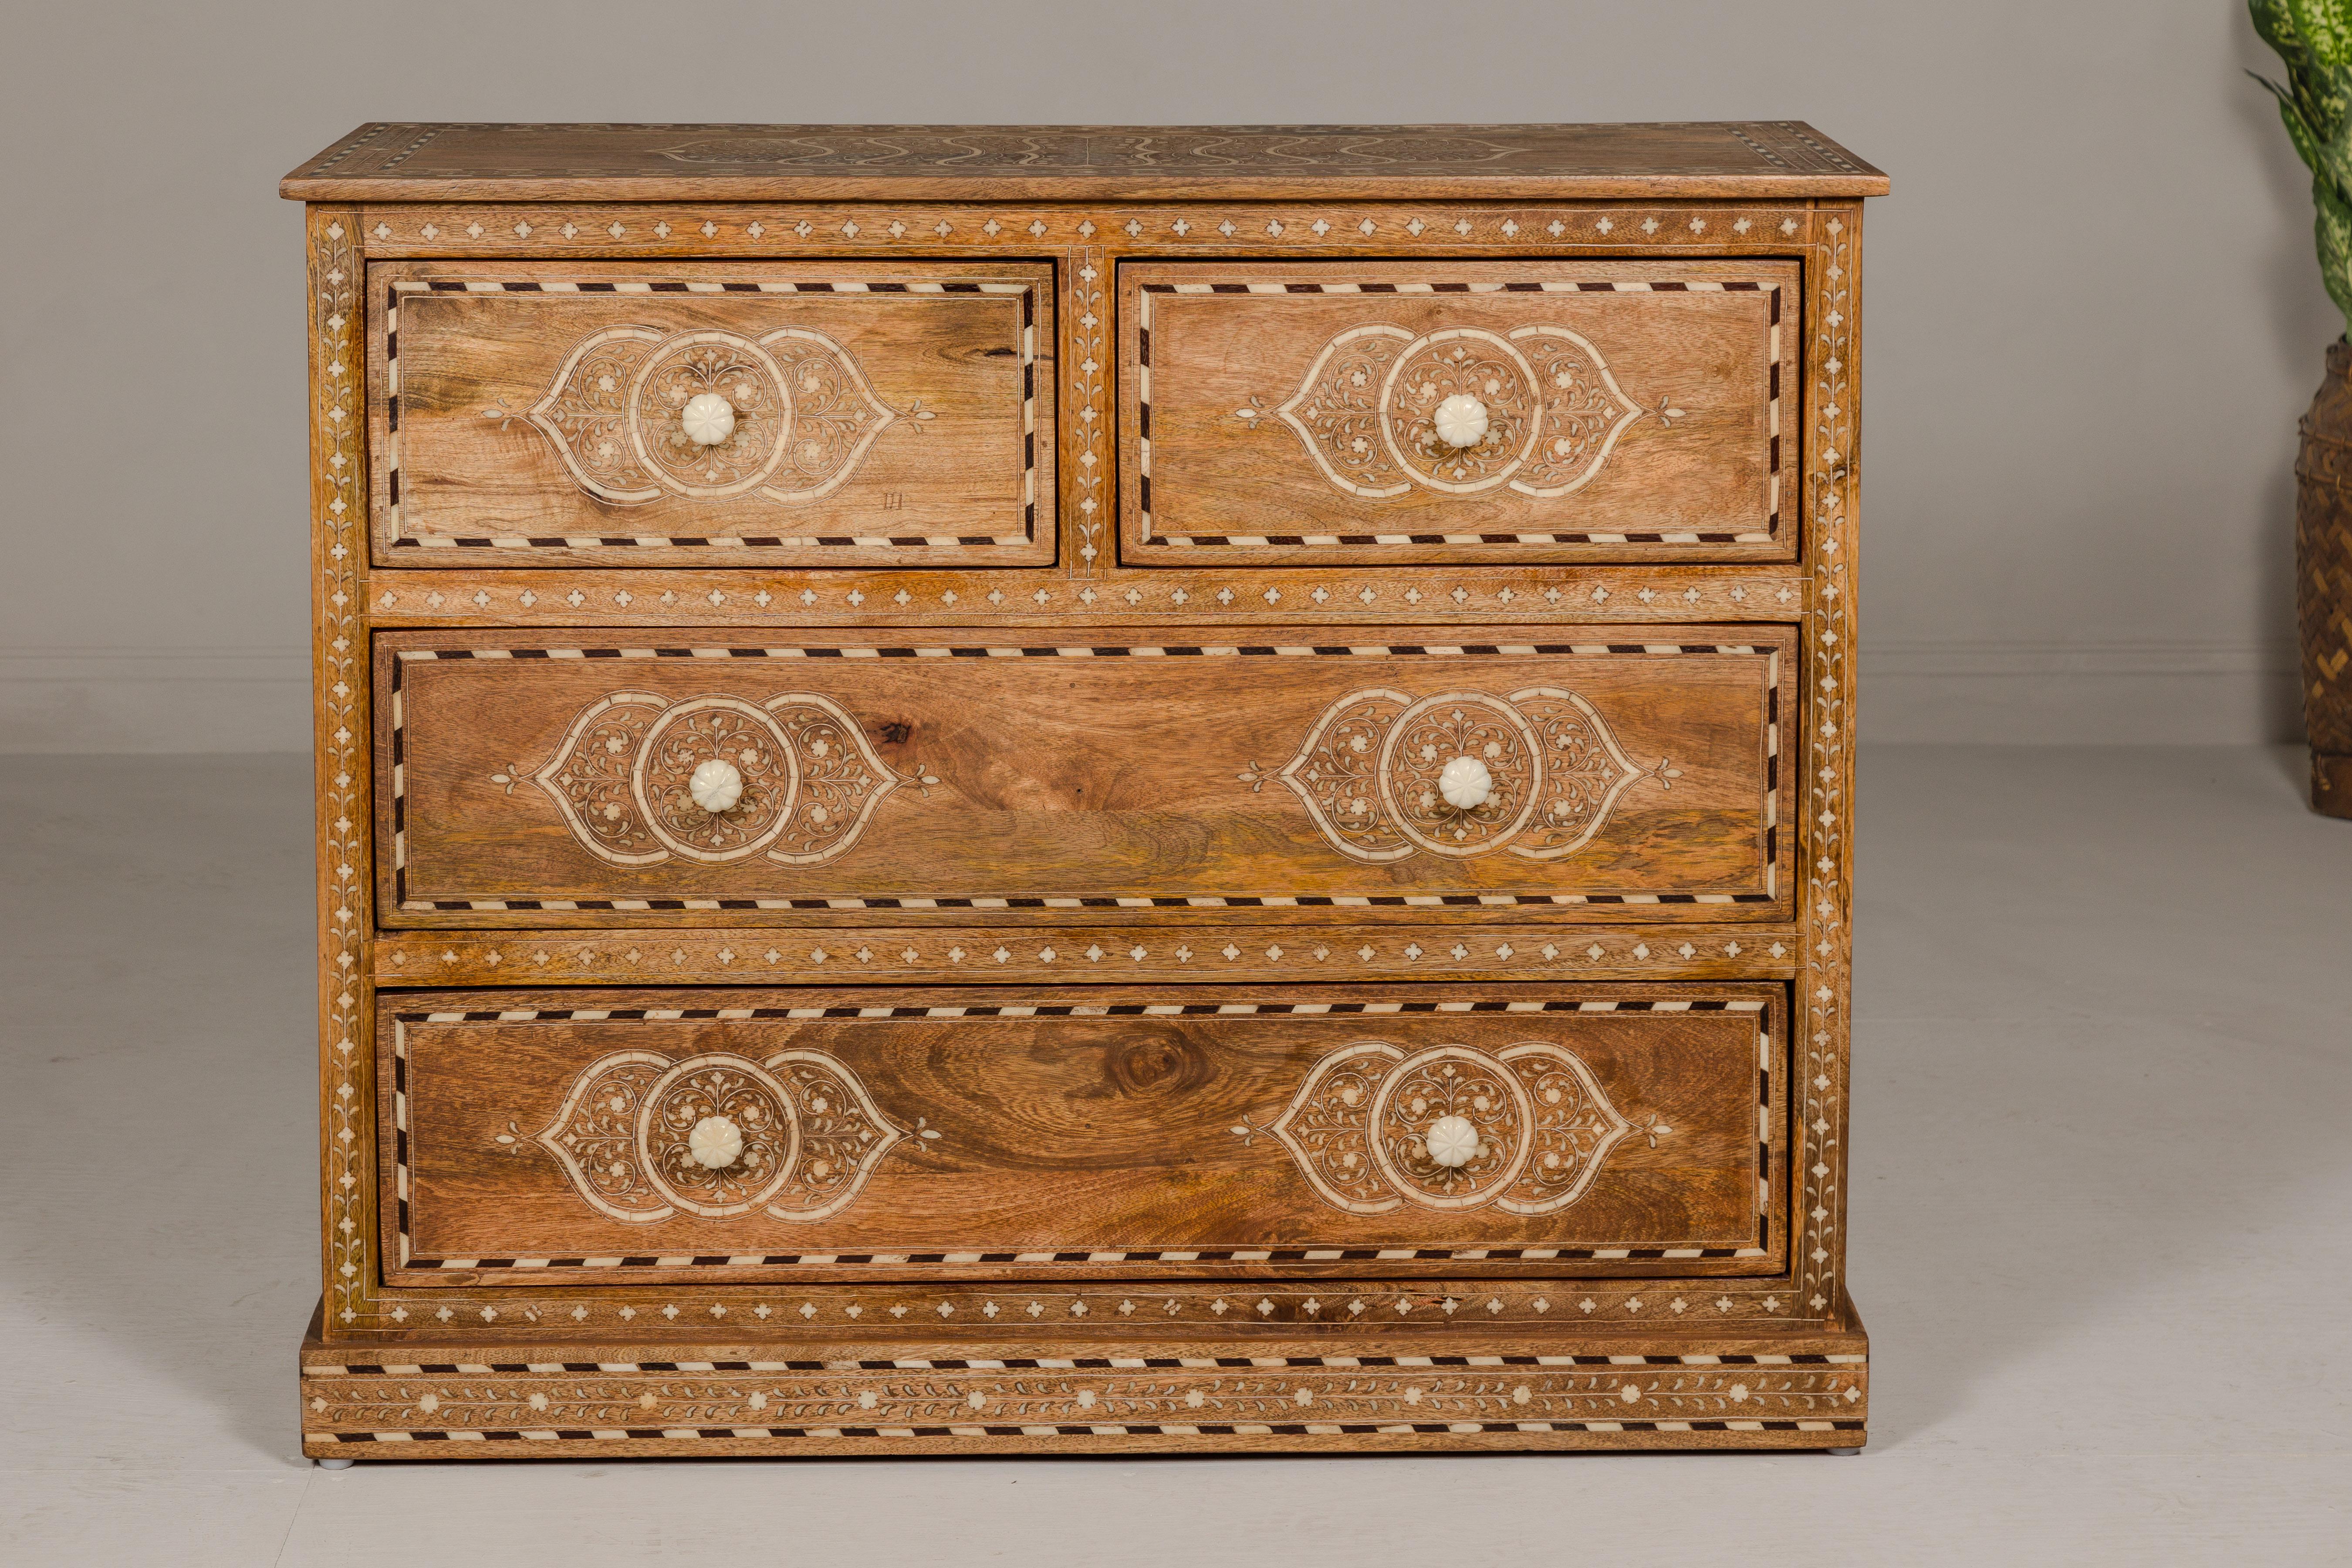 An Anglo Indian style mango wood chest with four drawers, floral themed bone inlay and bone hardware. Immerse your home in the vibrant artistry and rich heritage of Anglo-Indian craftsmanship with this exquisite mango wood chest, adorned with